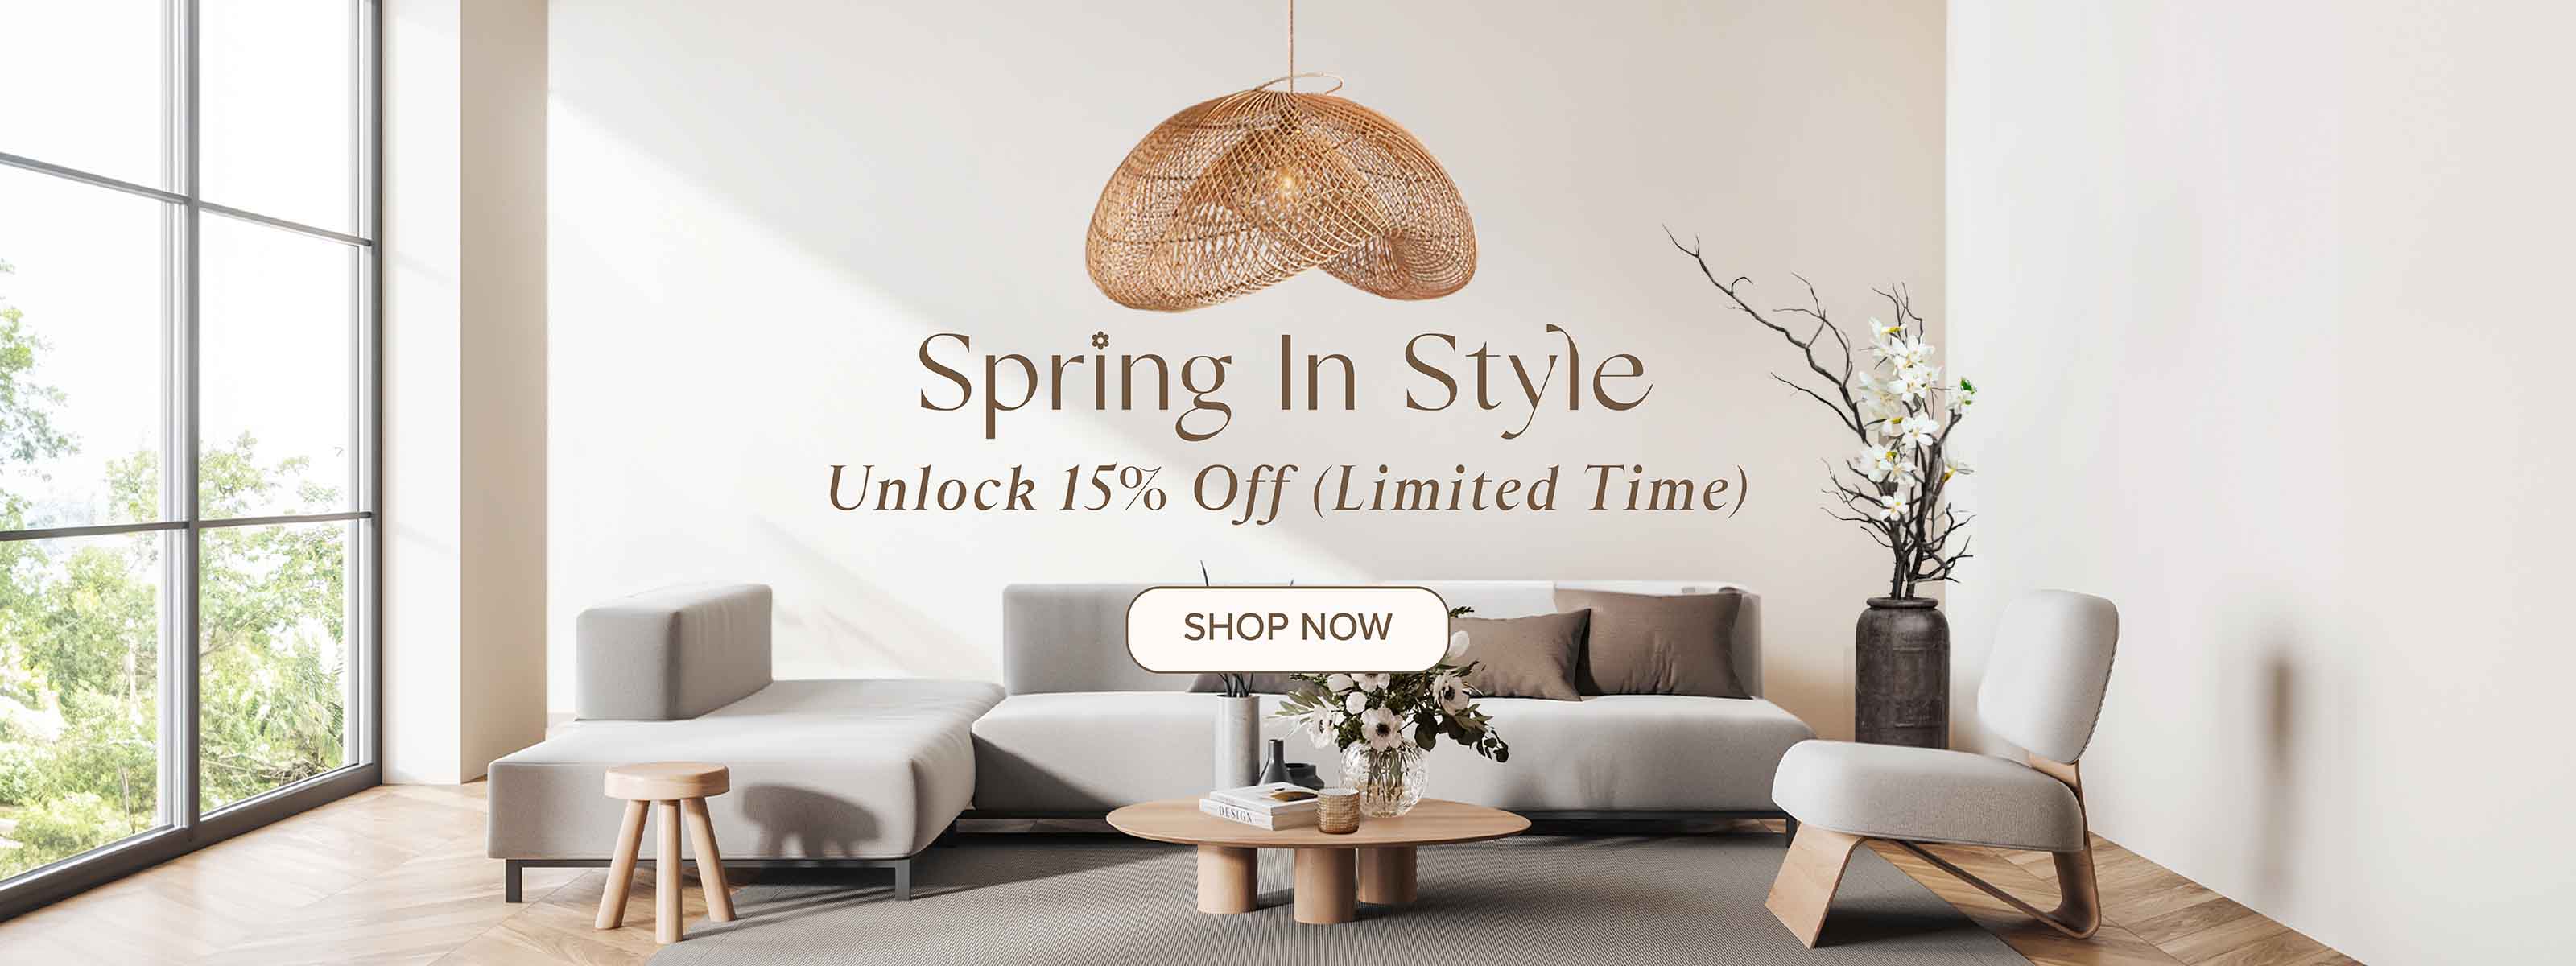 homepage banner spring in style pc